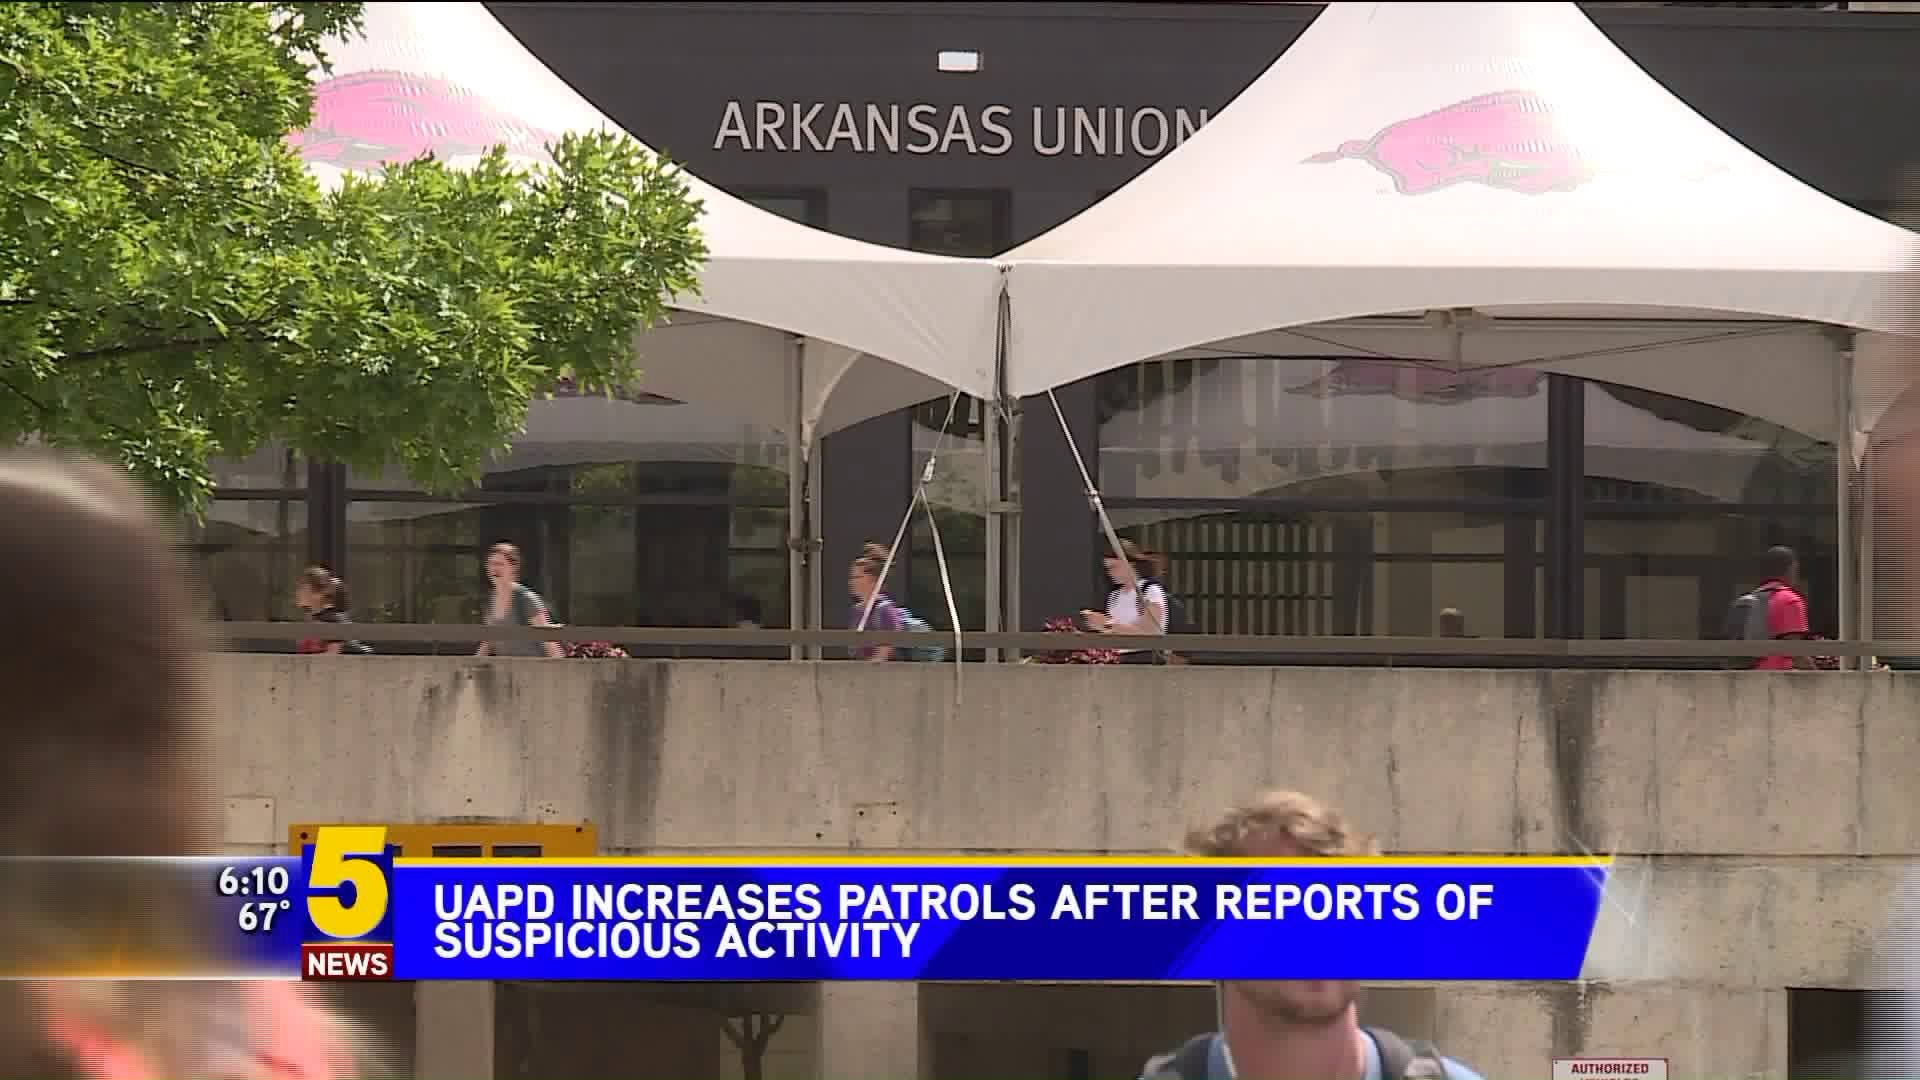 UAPD Increases Patrols After Reports Of Suspicious Activity